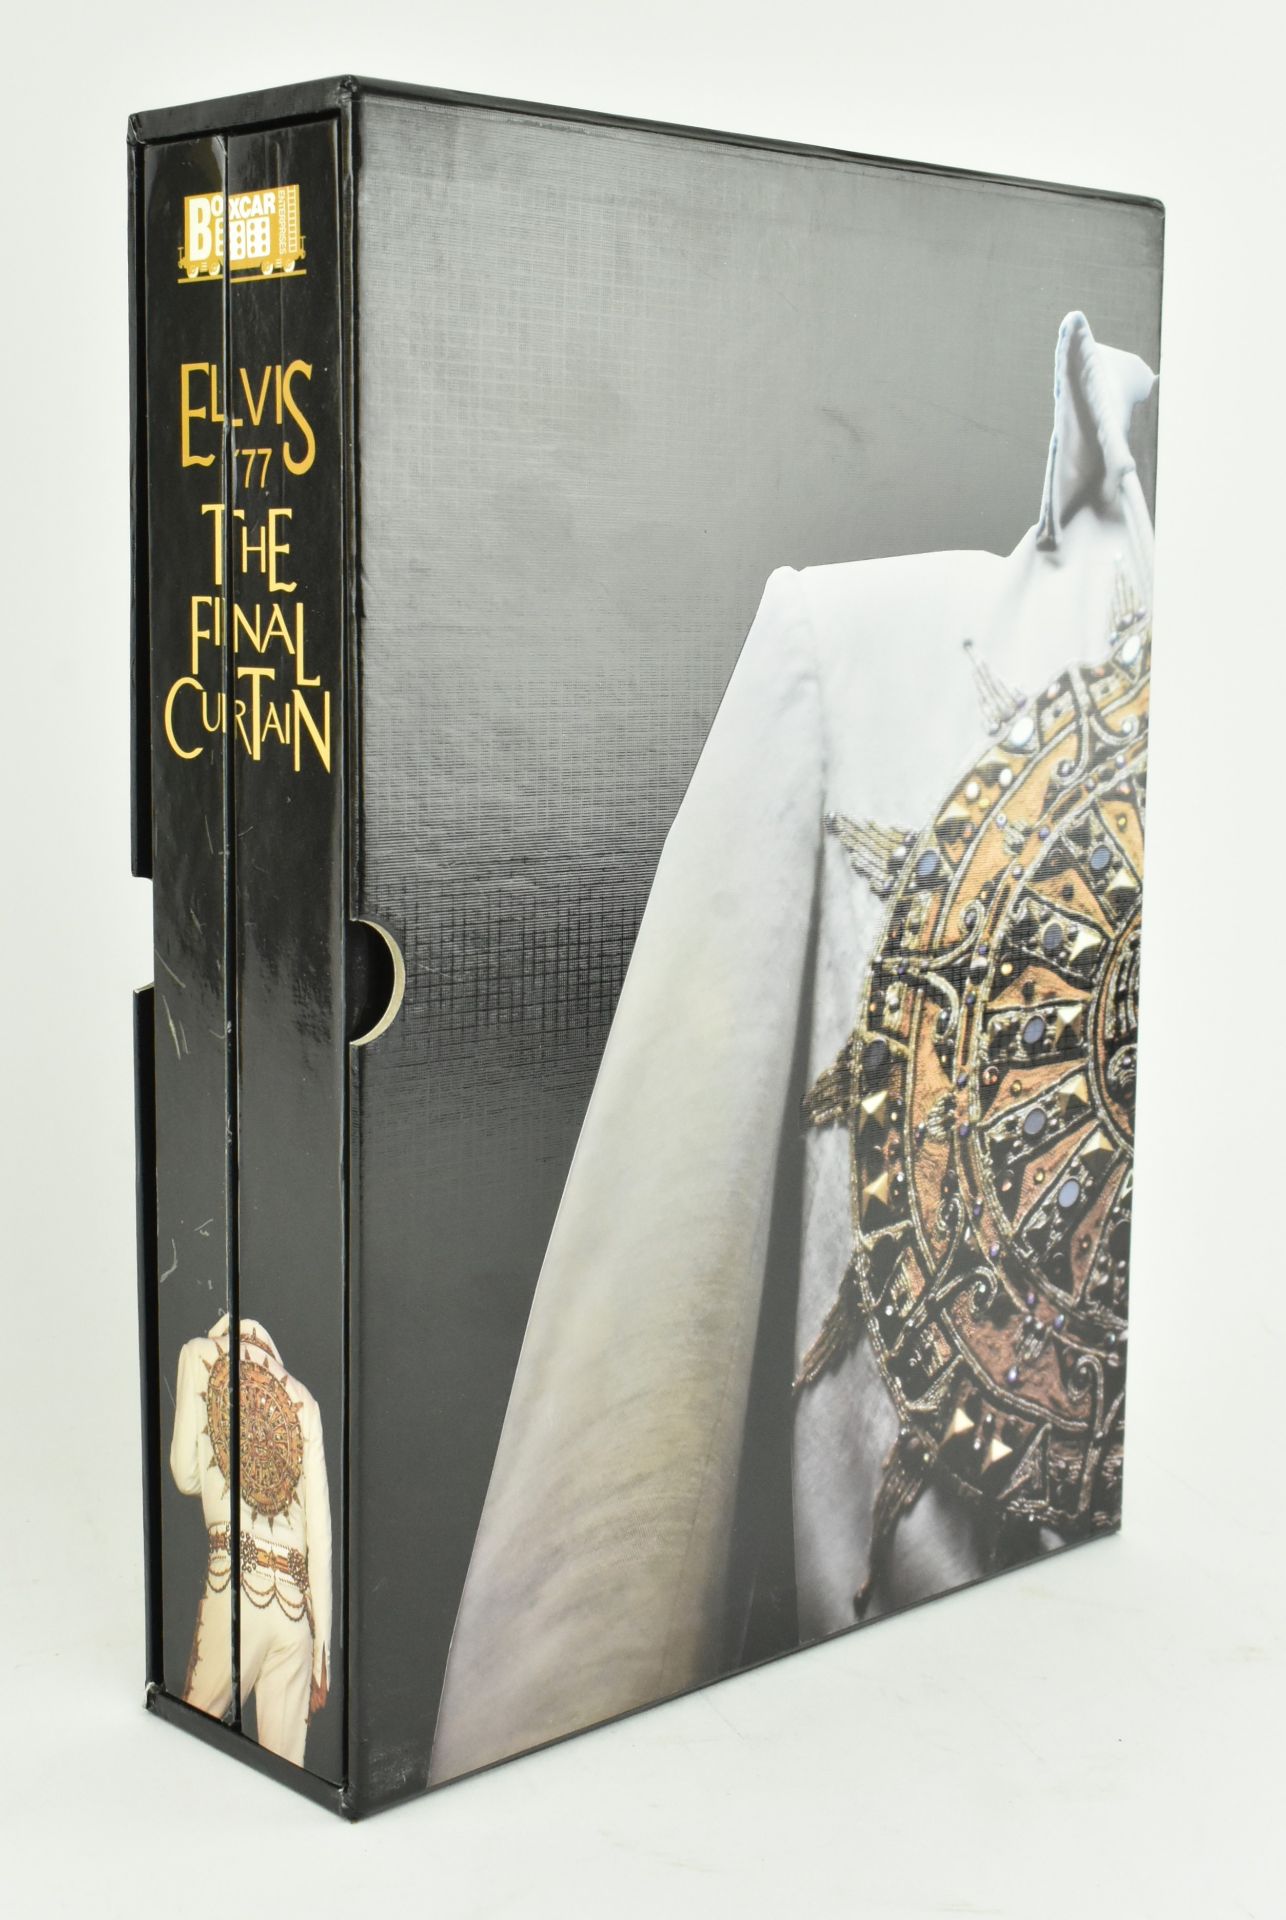 ELVIS '77 THE FINAL CURTAIN PRIVATELY PRINTED BOX SET